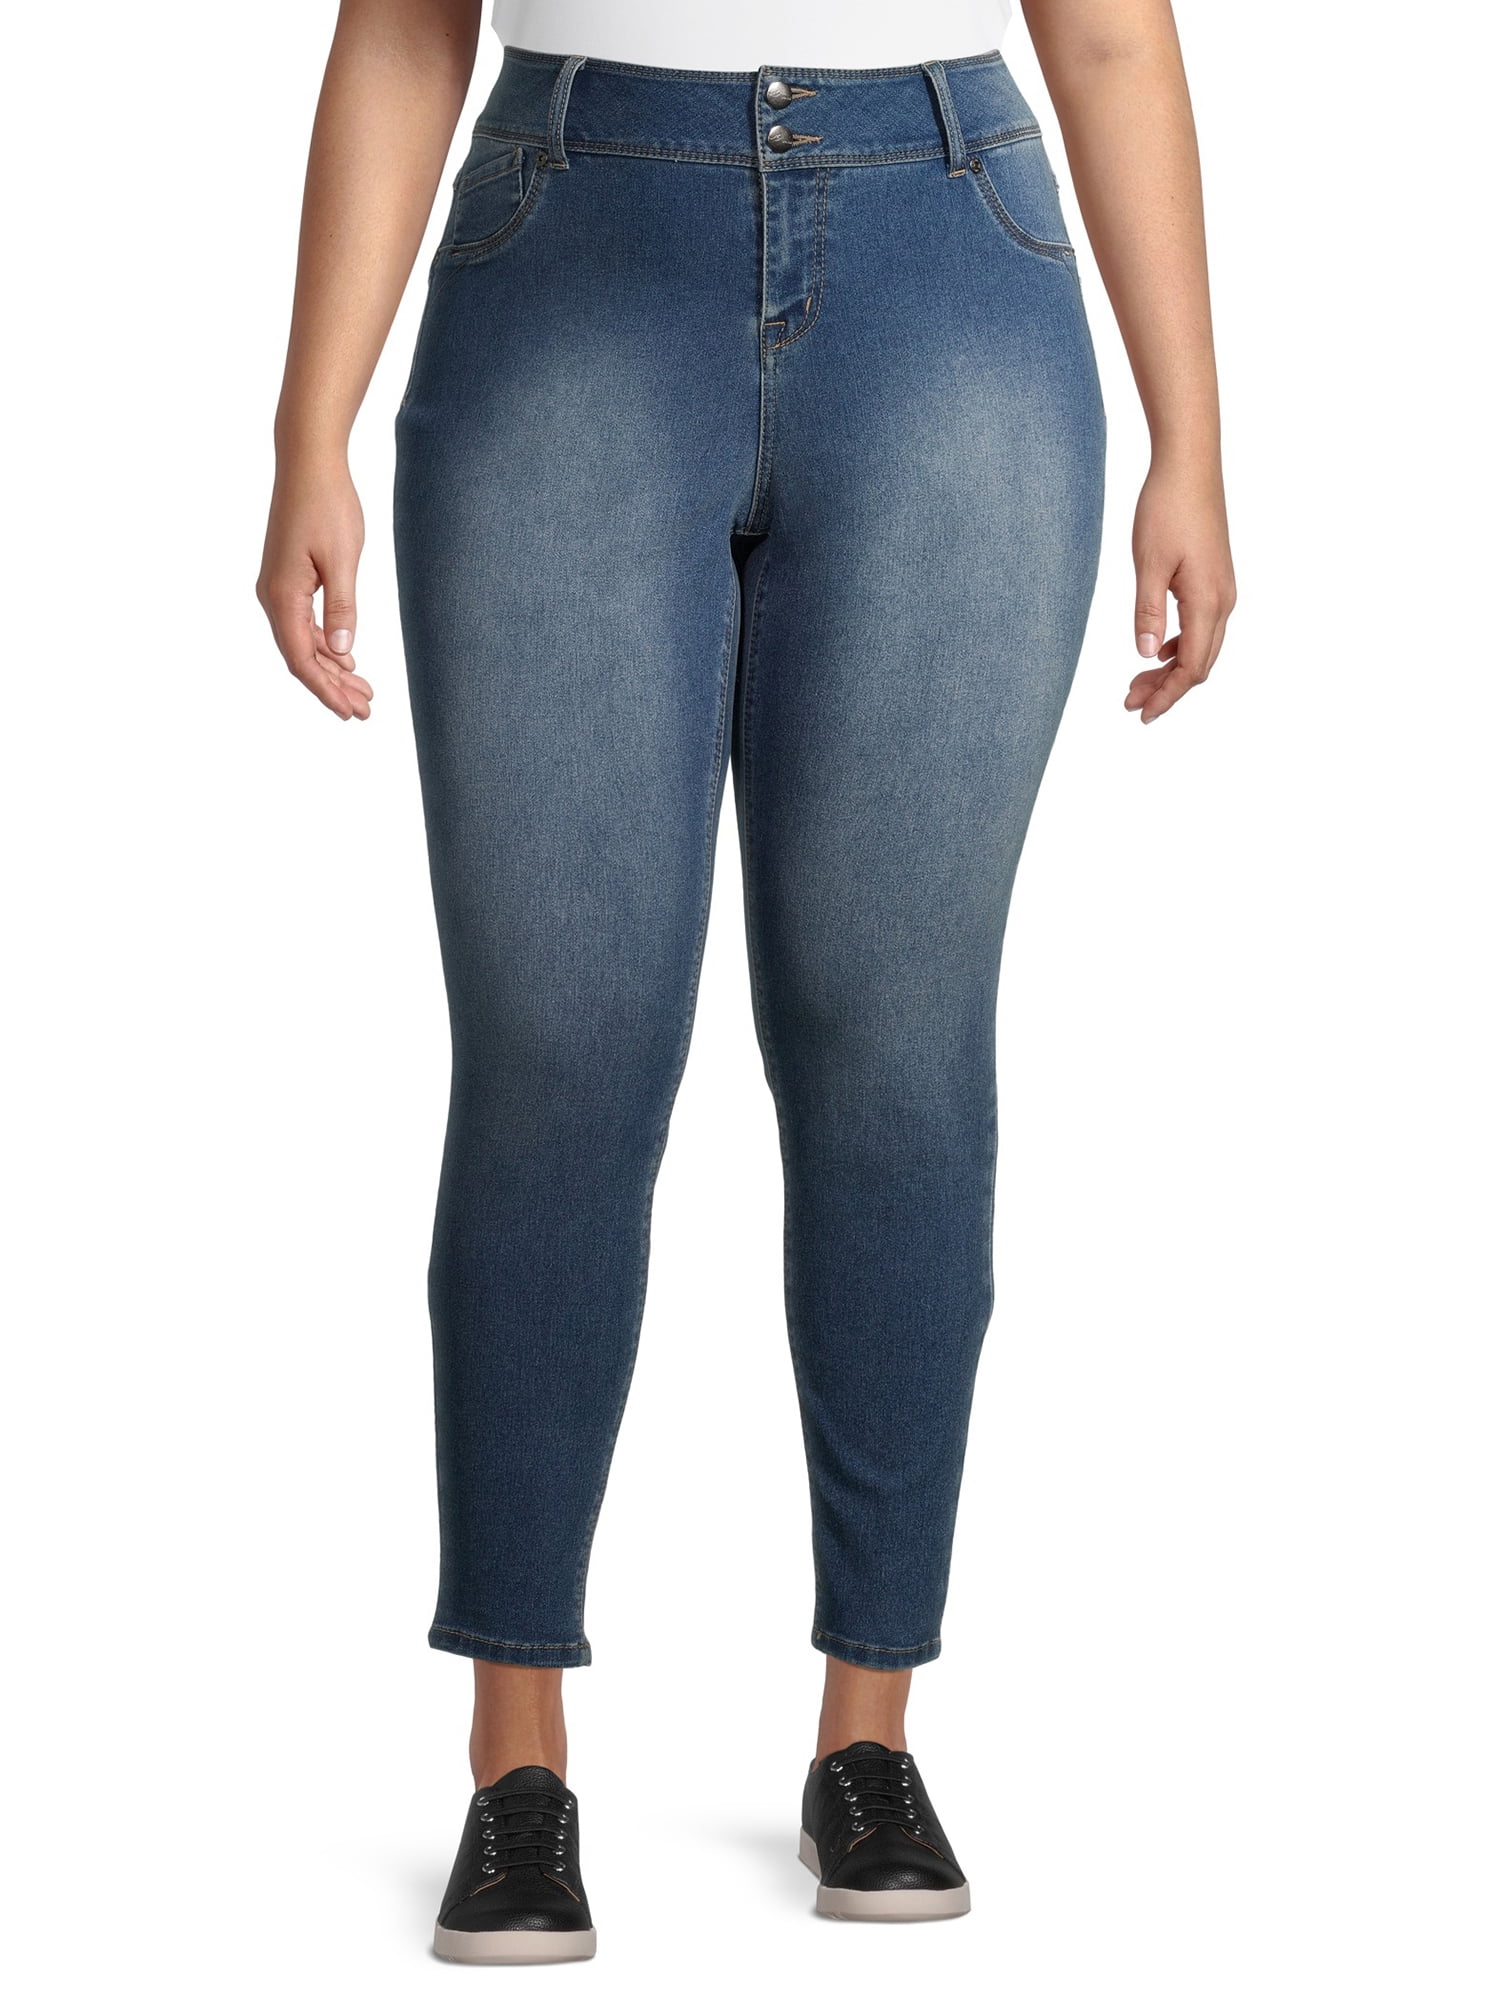 A3 Denim Women's Plus Size Slimming Skinny Jeans with Double Buttons ...